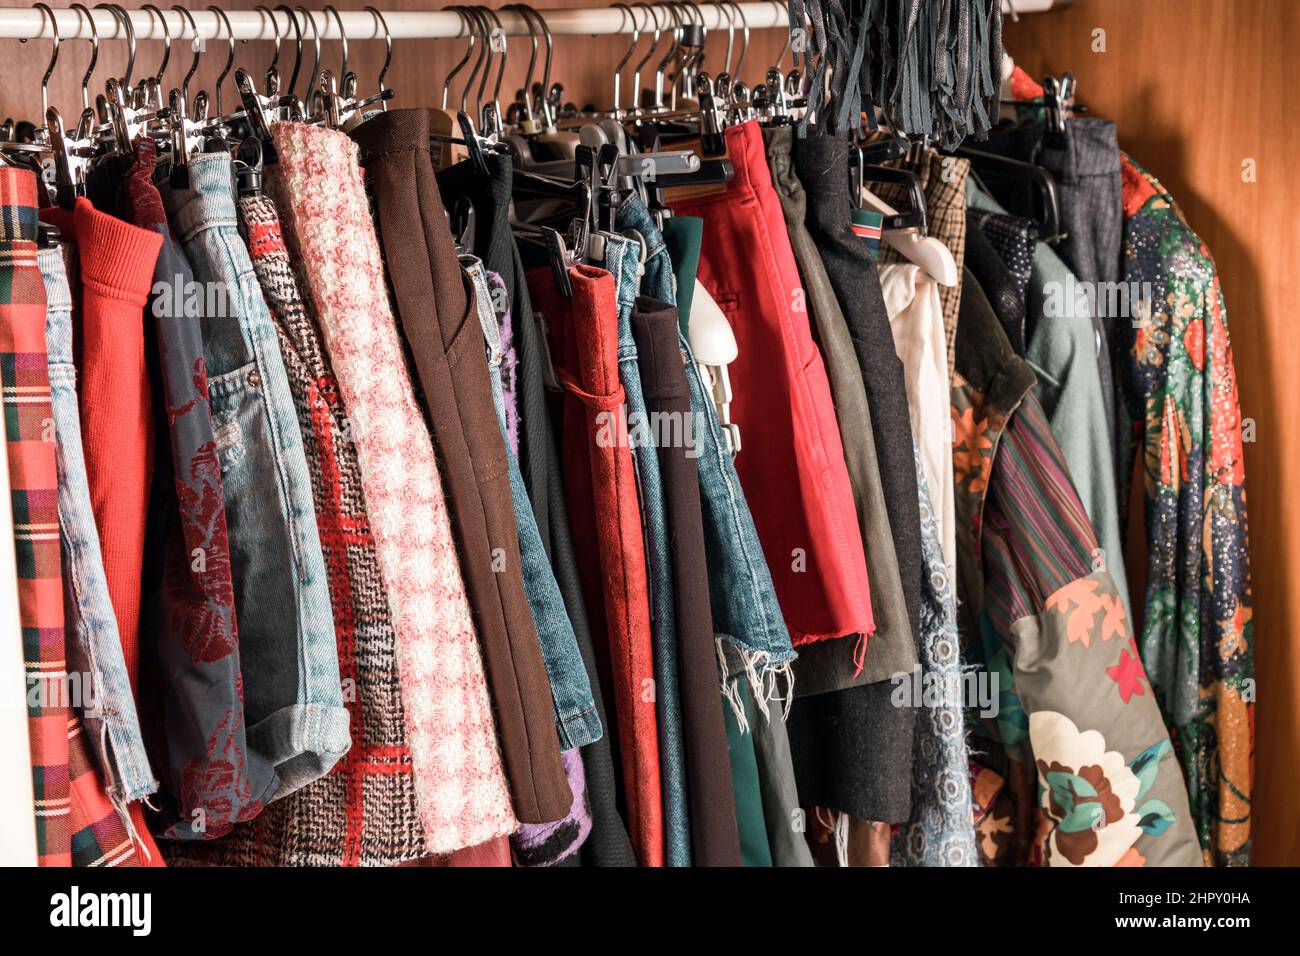 Assorted colorful female clothing hanging in a closet or walk in wardrobe interior on a rail in close up Stock Photo